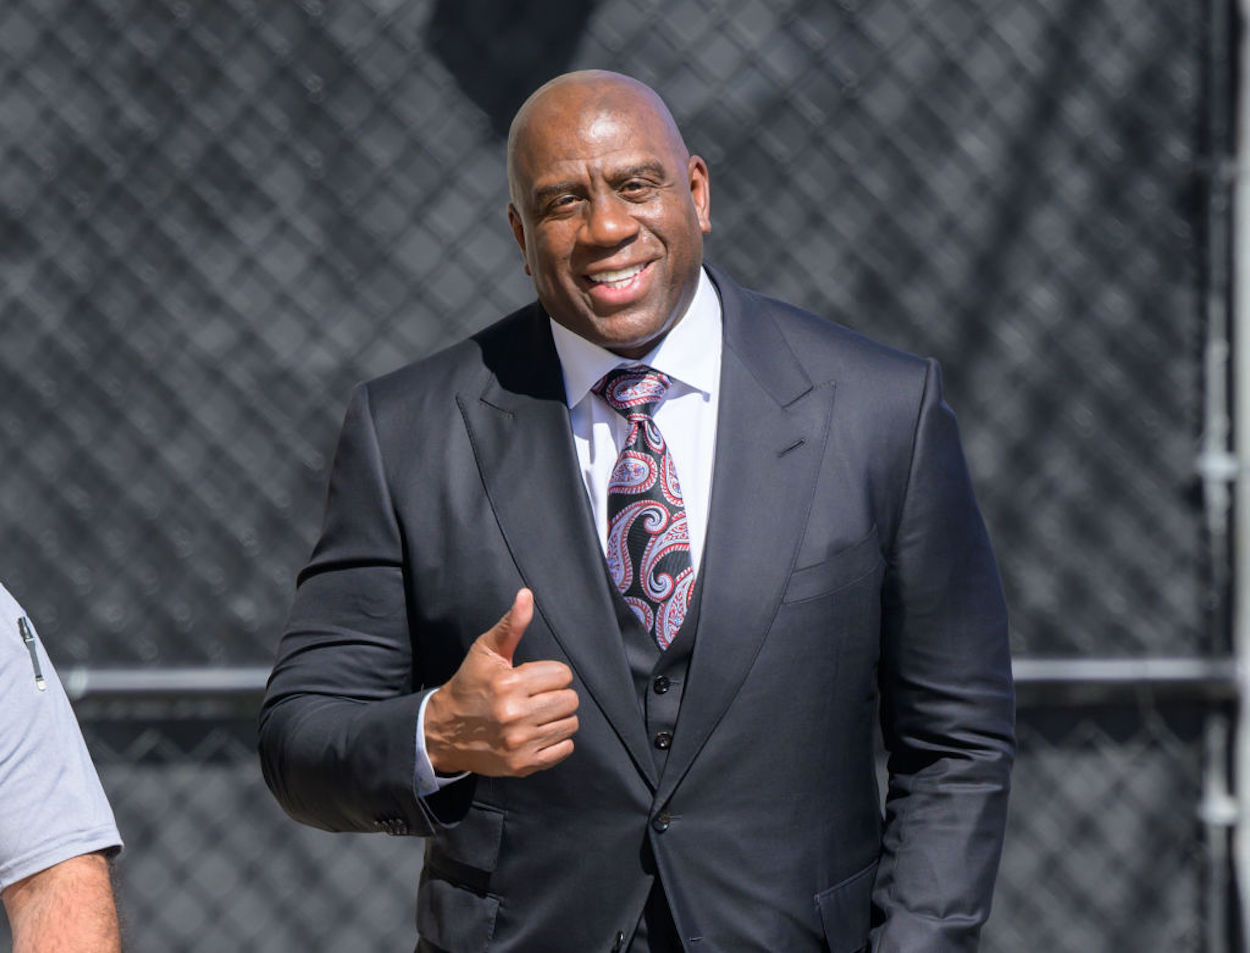 Los Angles Lakers legend Magic Johnson in 2022